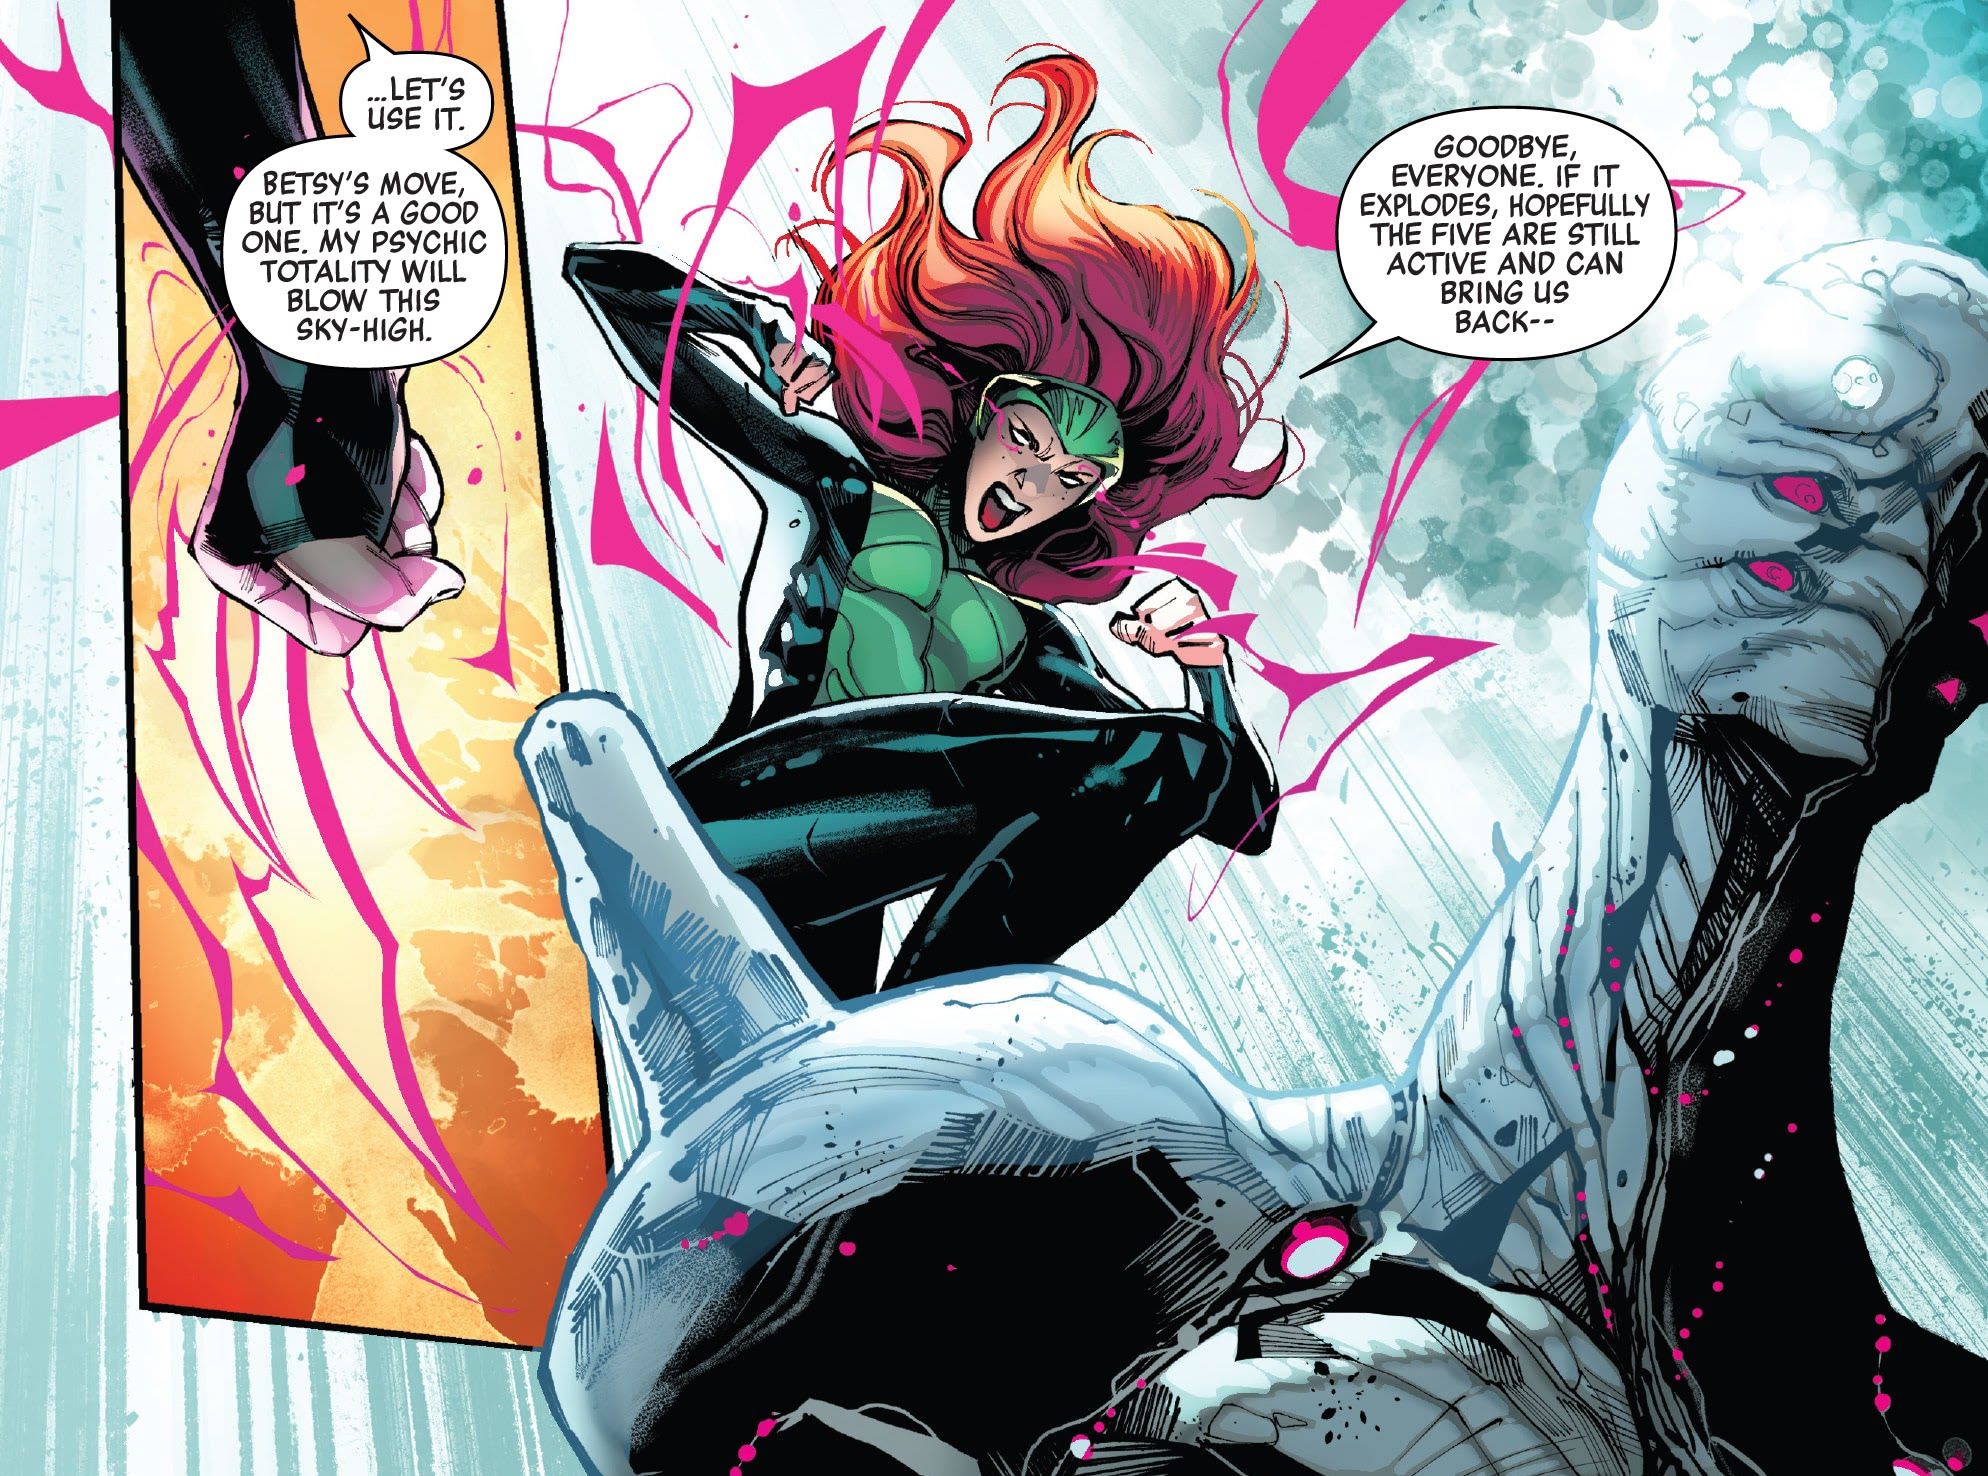 Jean Grey Copies A Signature Psylocke Move to Become an All-New Wolverine